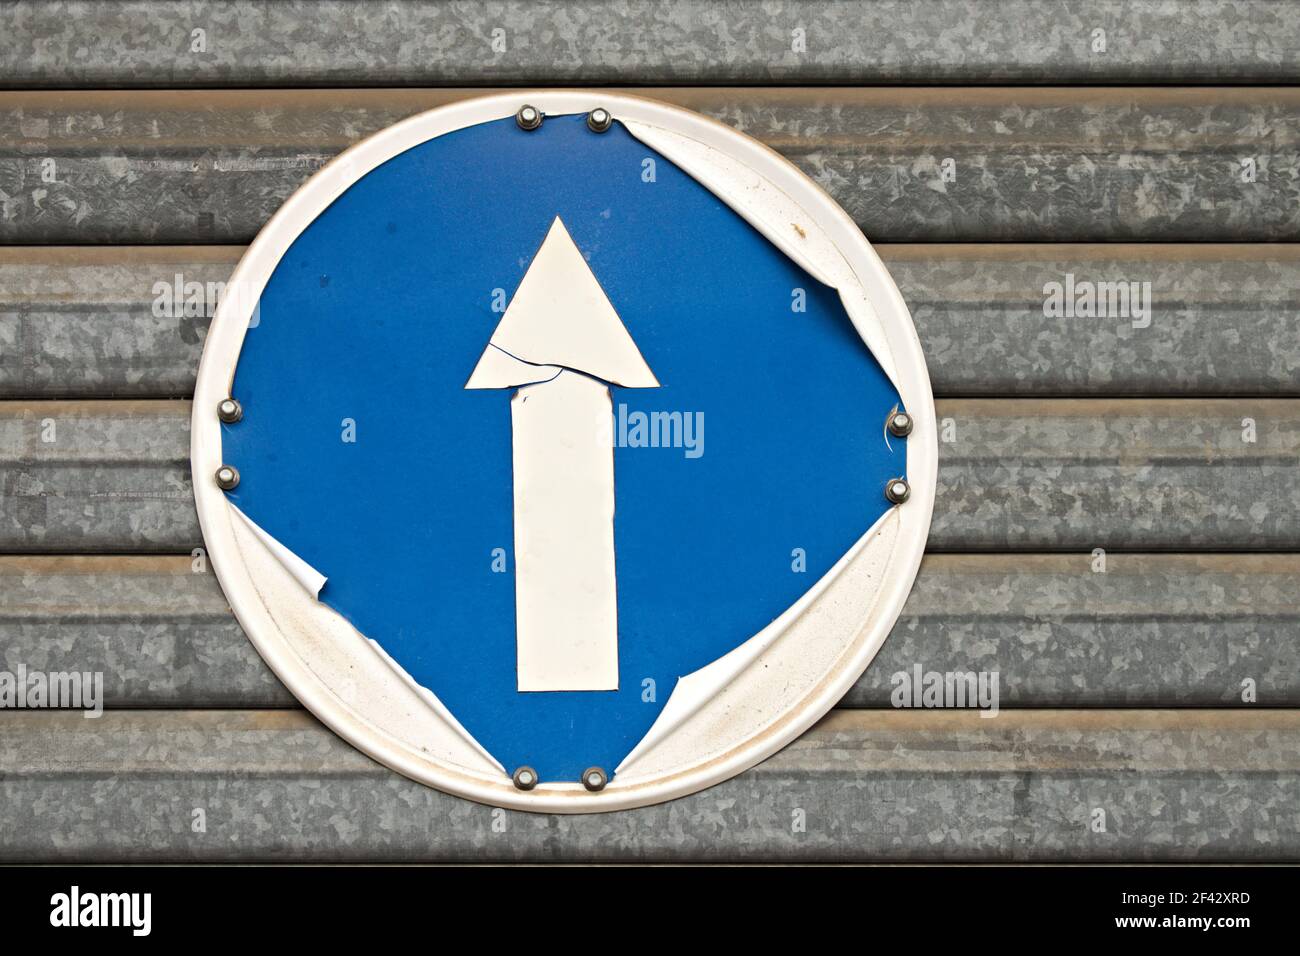 An old traffic sign with an arrow that is located on a metal shutter ...